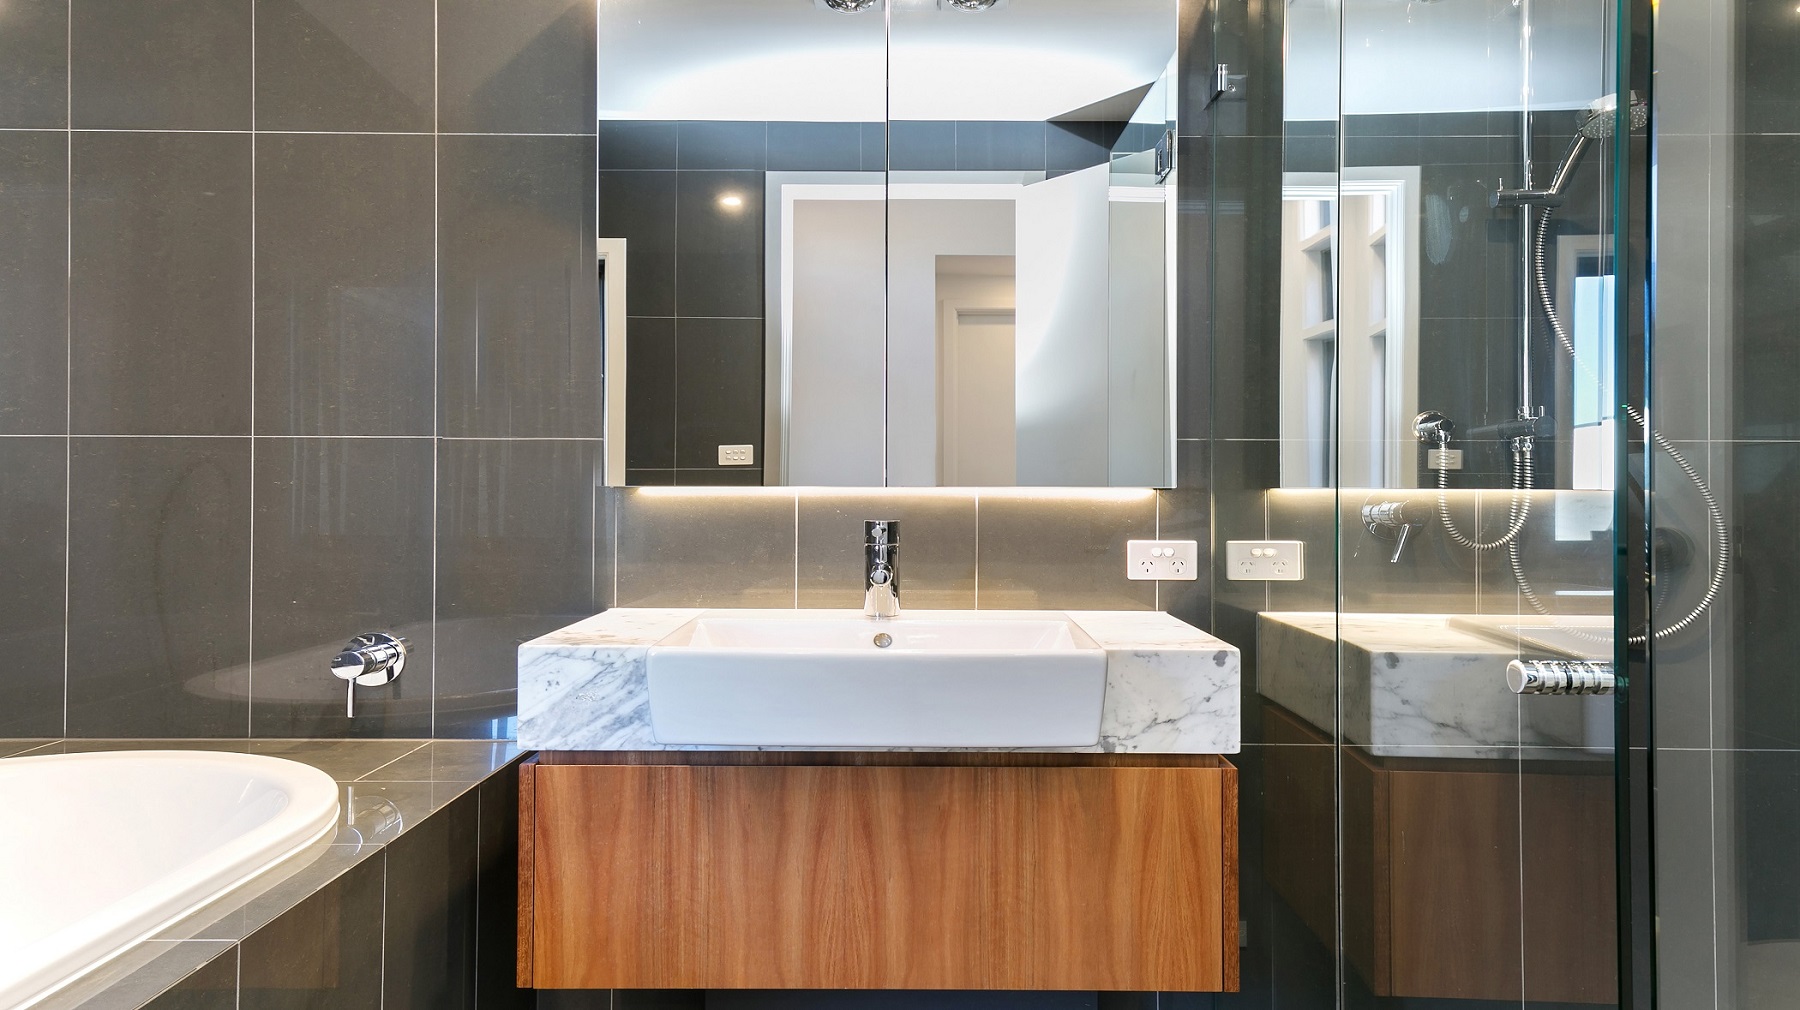 Timber Veneer vanity with a Carrara Marble top and mirror cabinets above - Annandale, Sydney